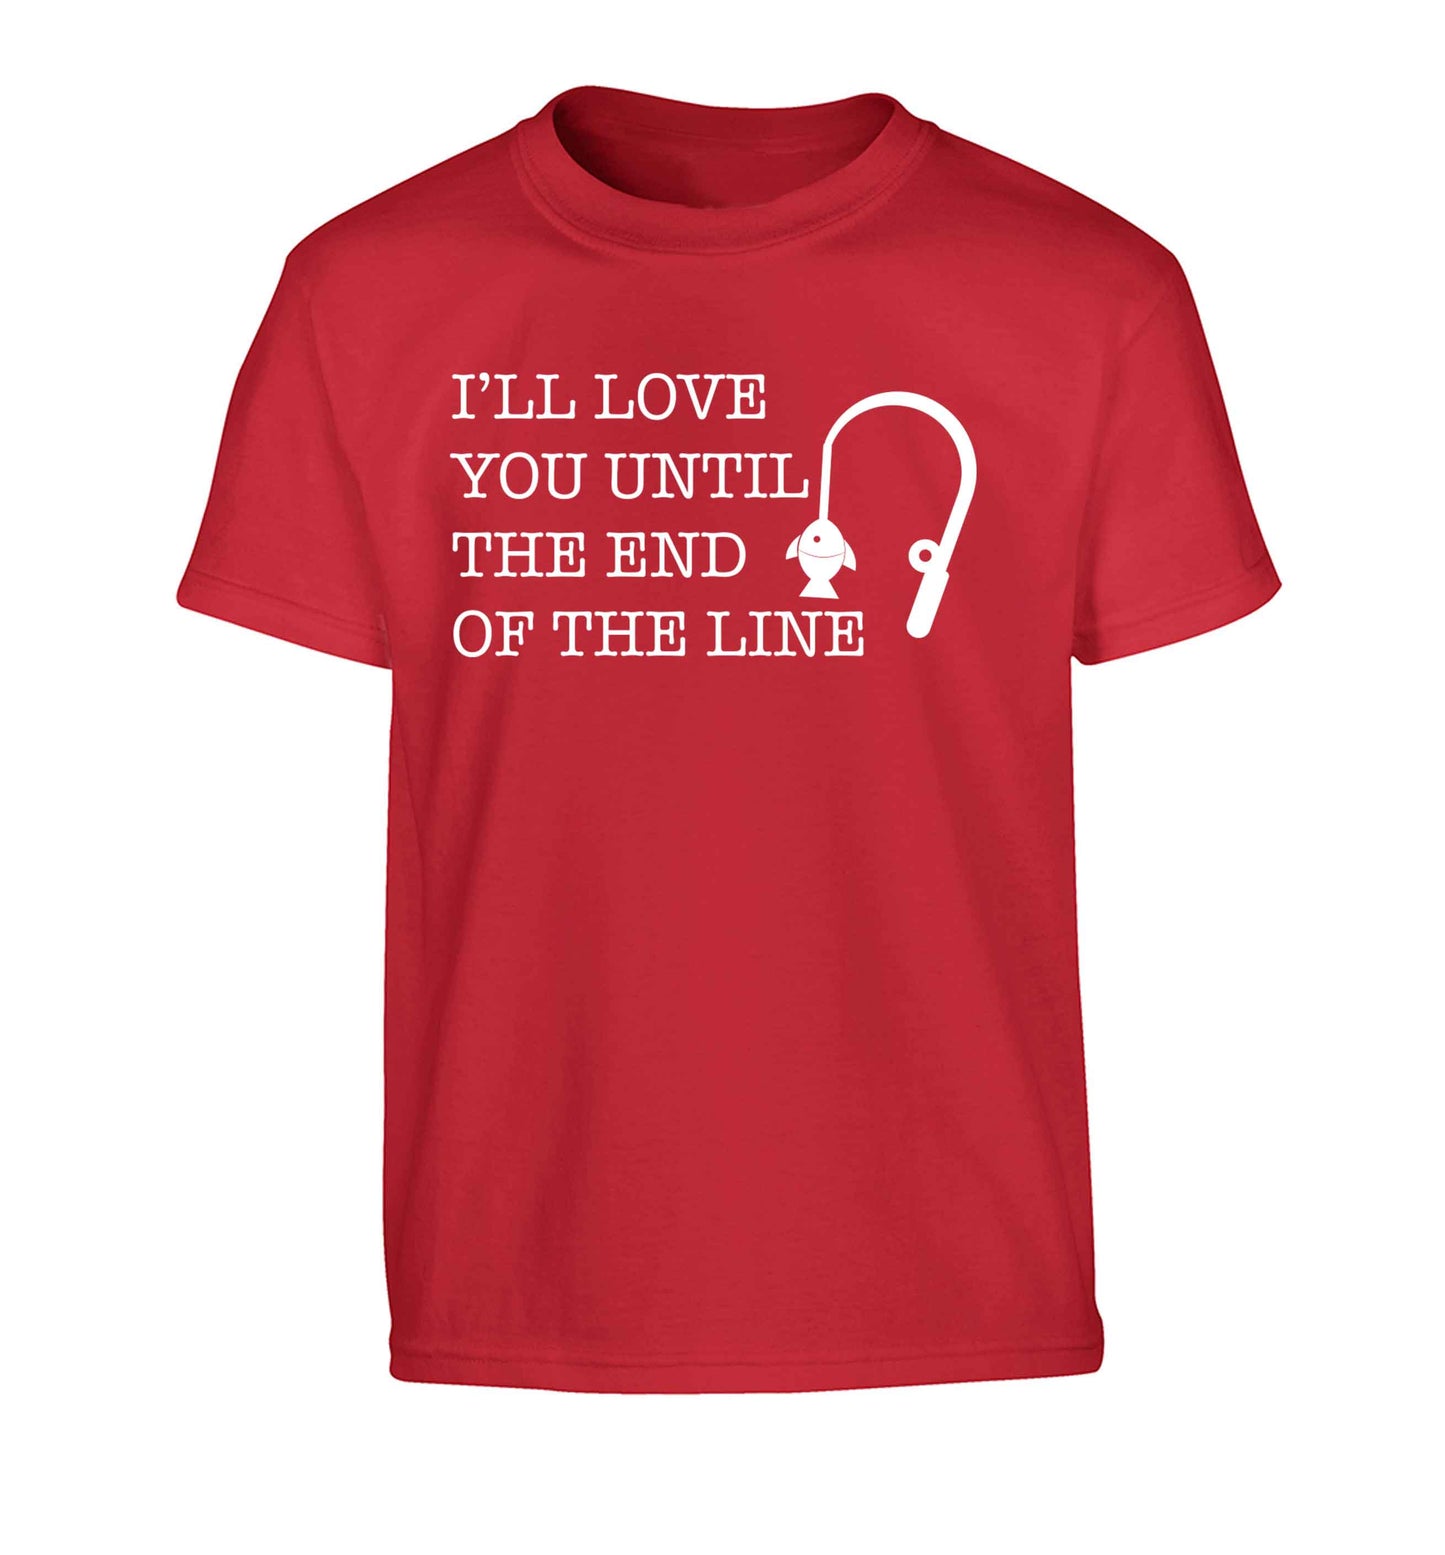 I'll love you until the end of the line Children's red Tshirt 12-13 Years